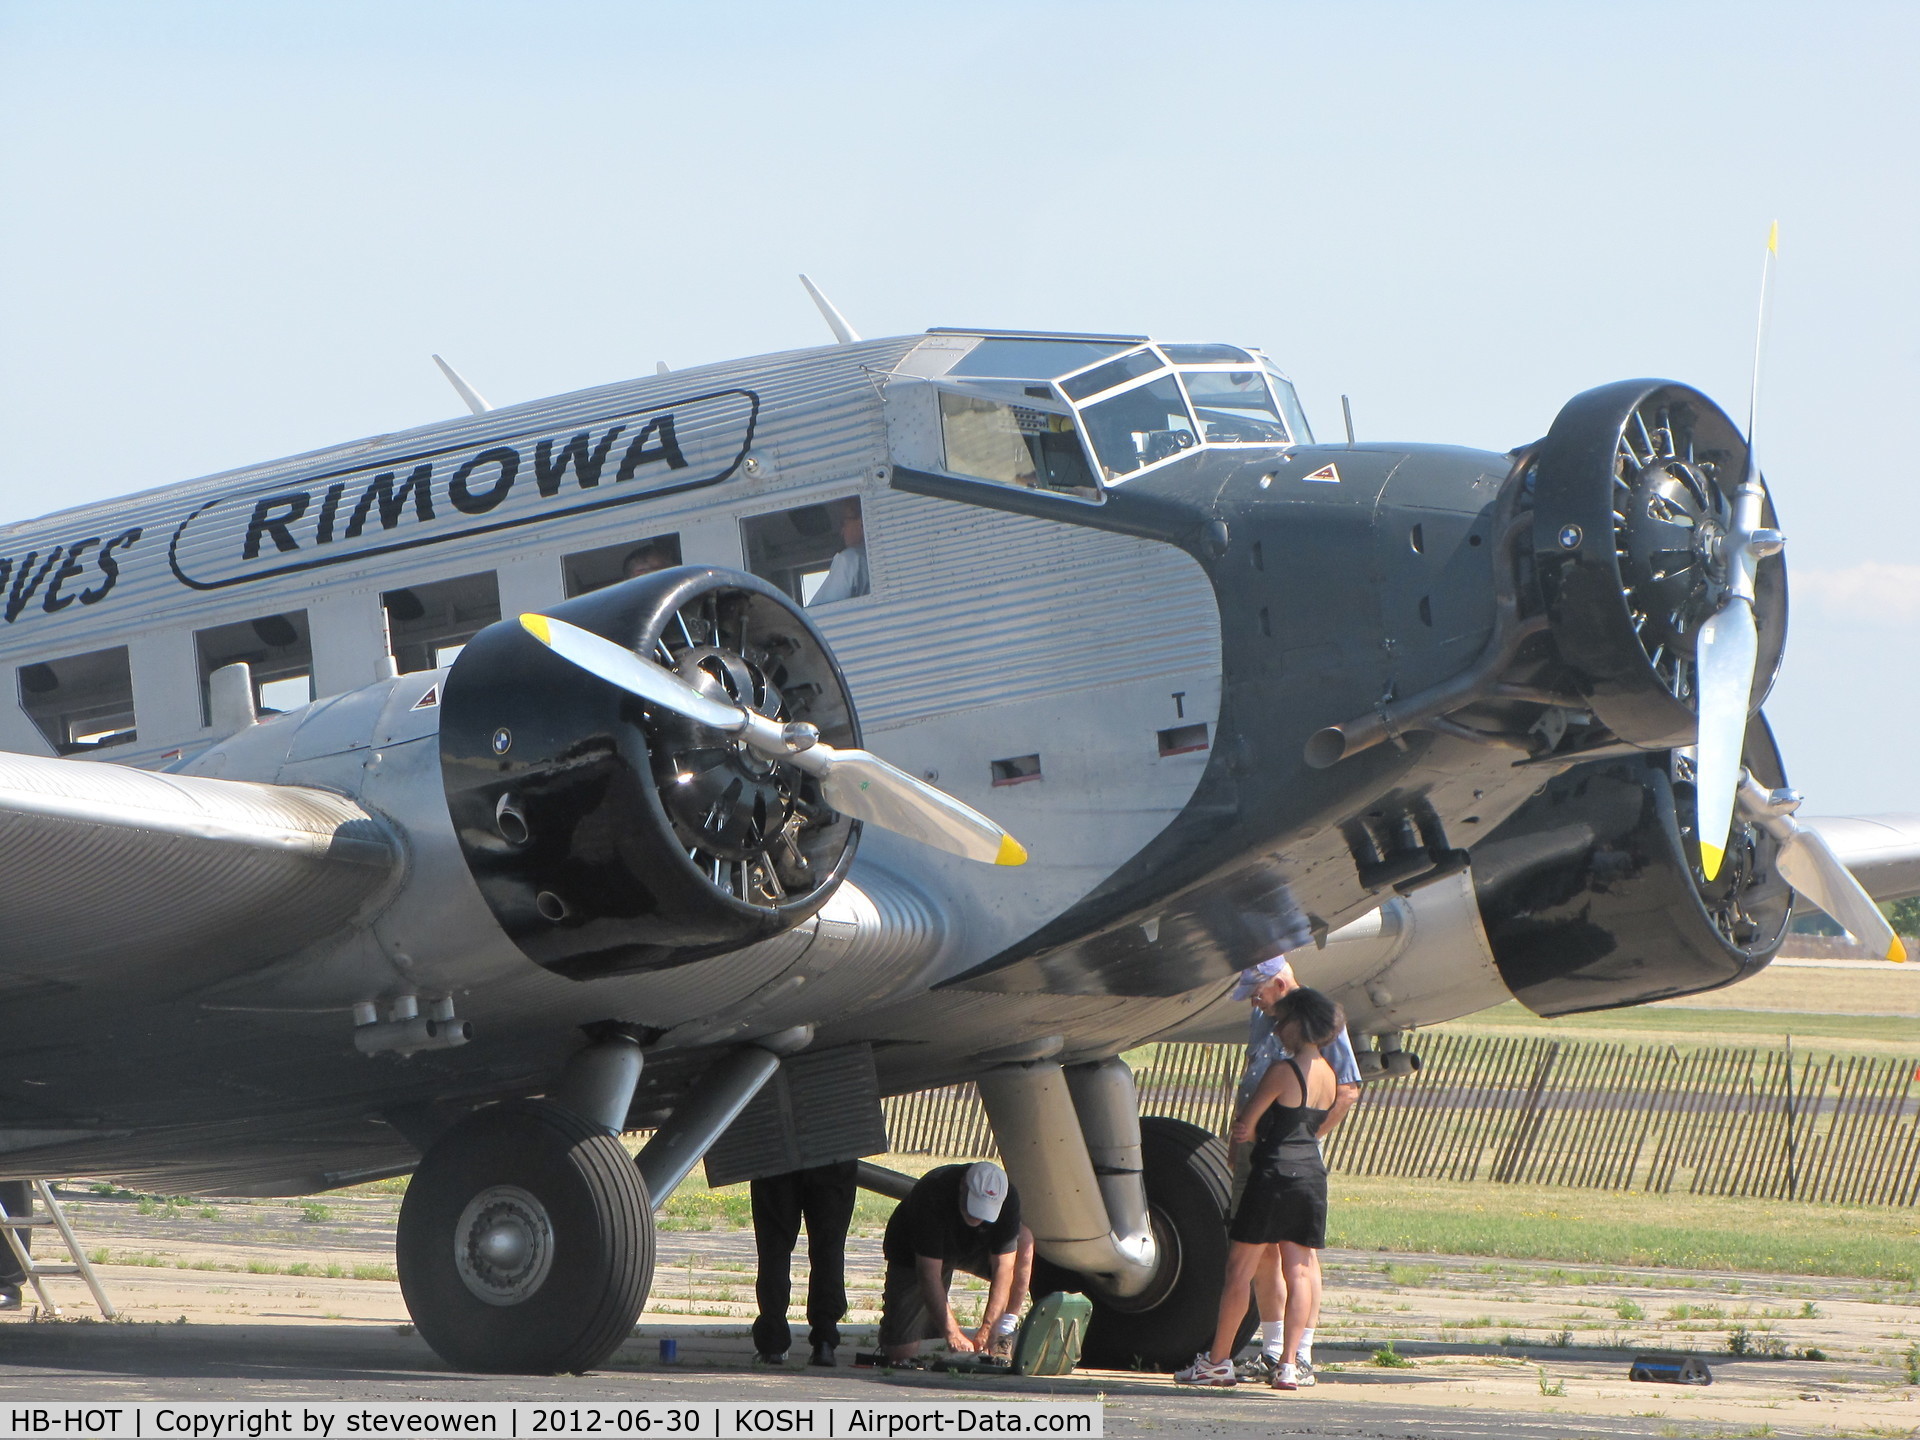 HB-HOT, 1939 Junkers Ju-52/3m g4e C/N 6595, Arrived at Oshkosh WI USA for the EAA's Airventure